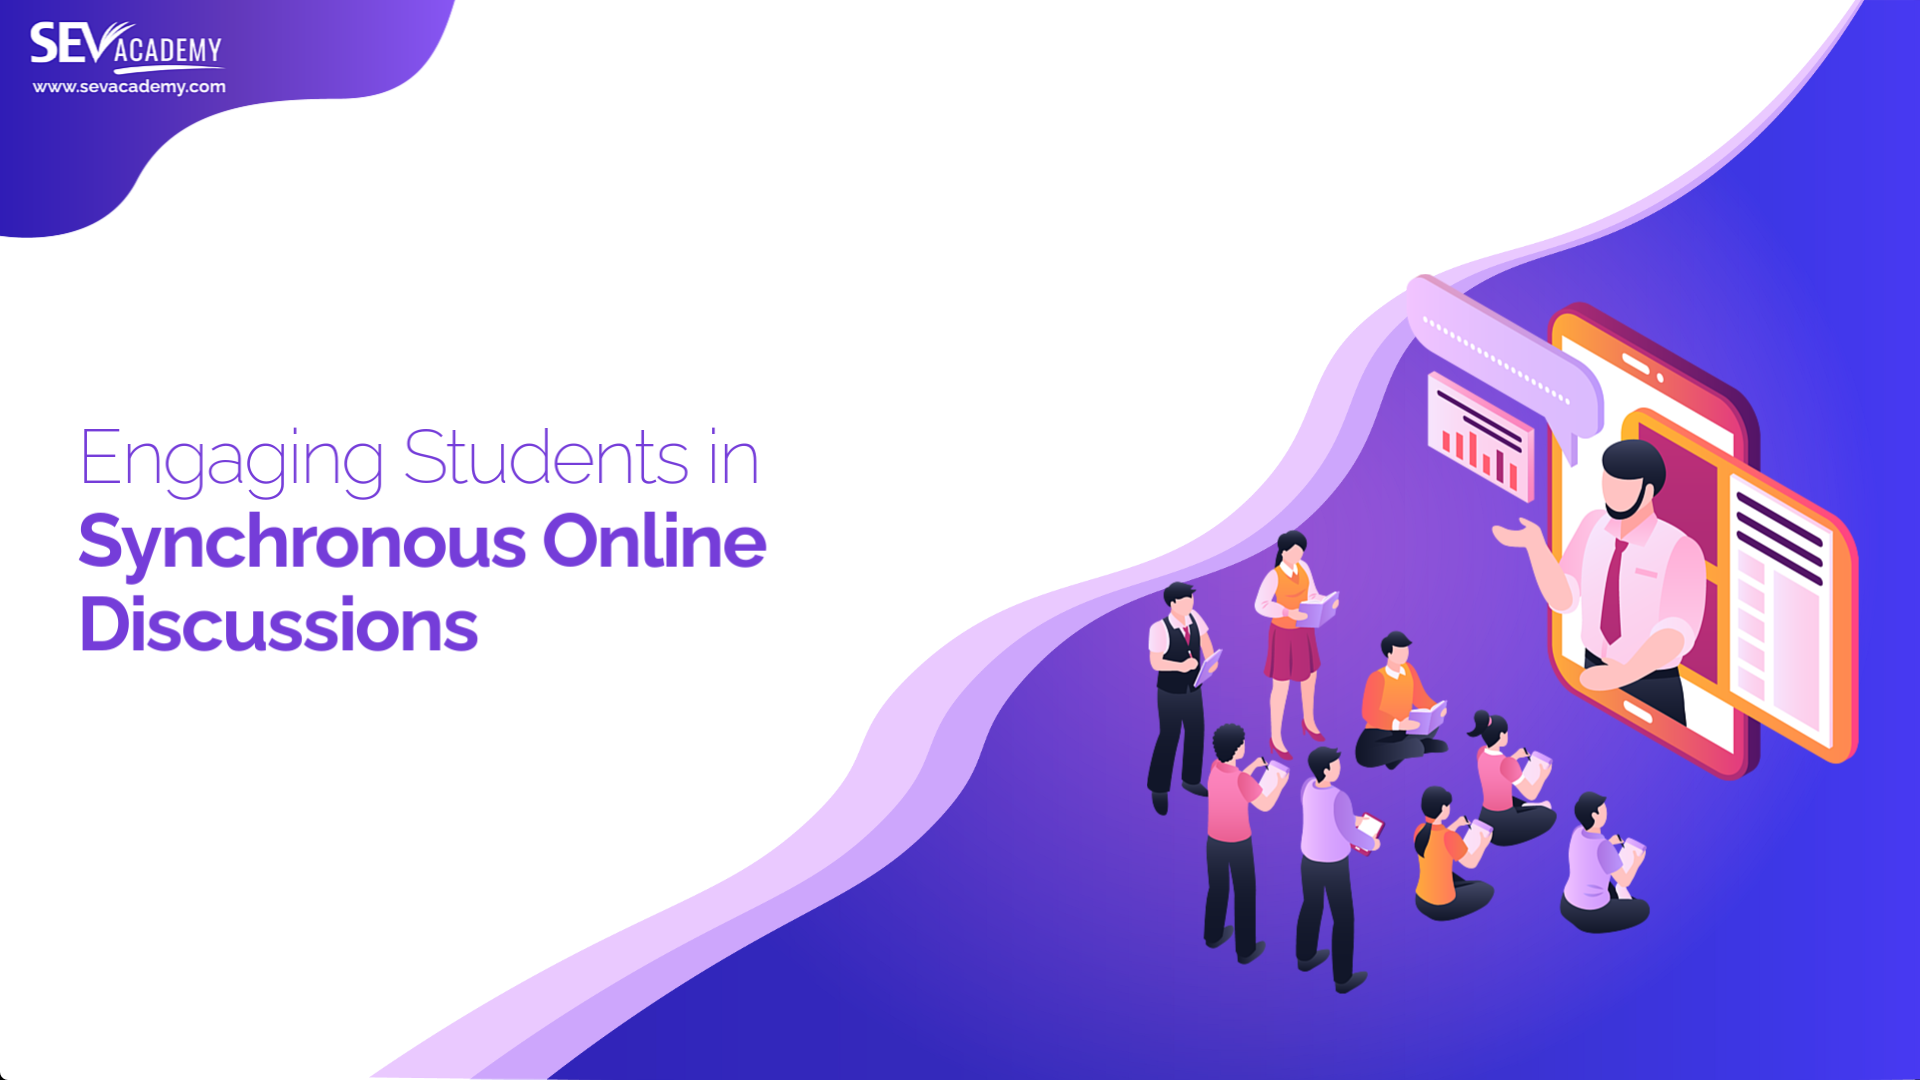 Engaging Students in Synchronous Online Discussions